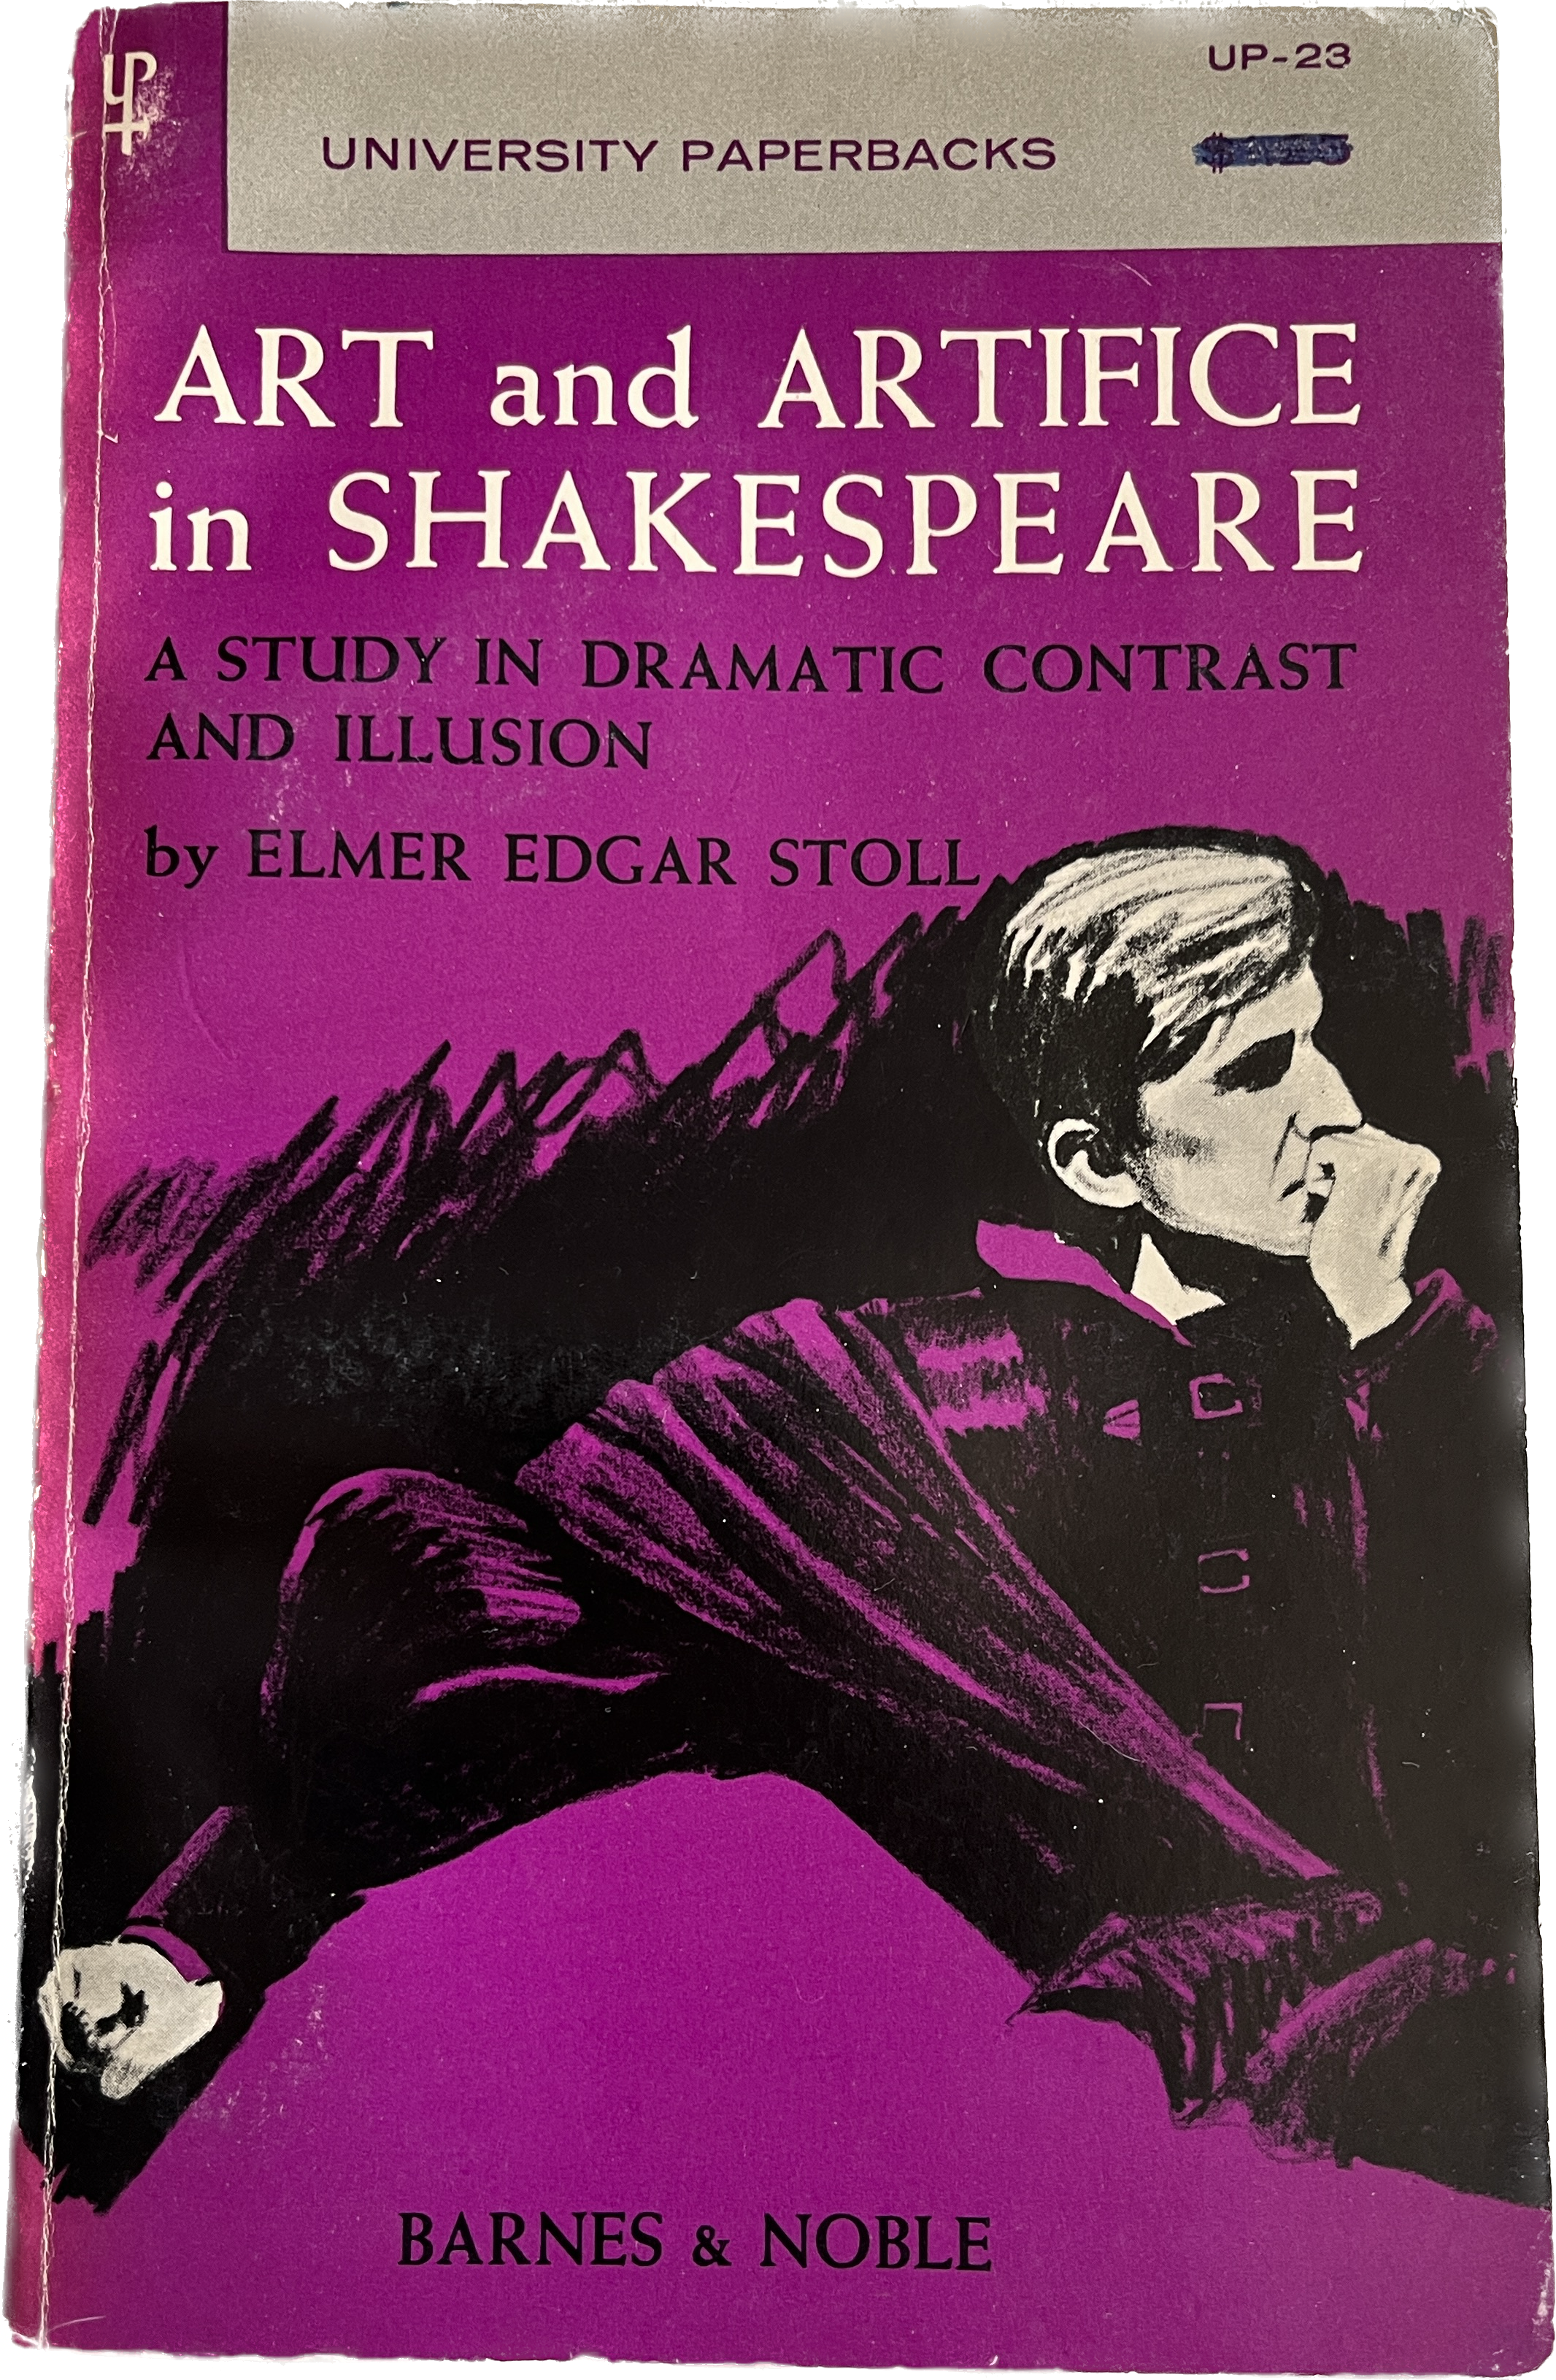 art and artifice in shakespeare: a study in dramatic contrast and illusion by elmer edgar stoll